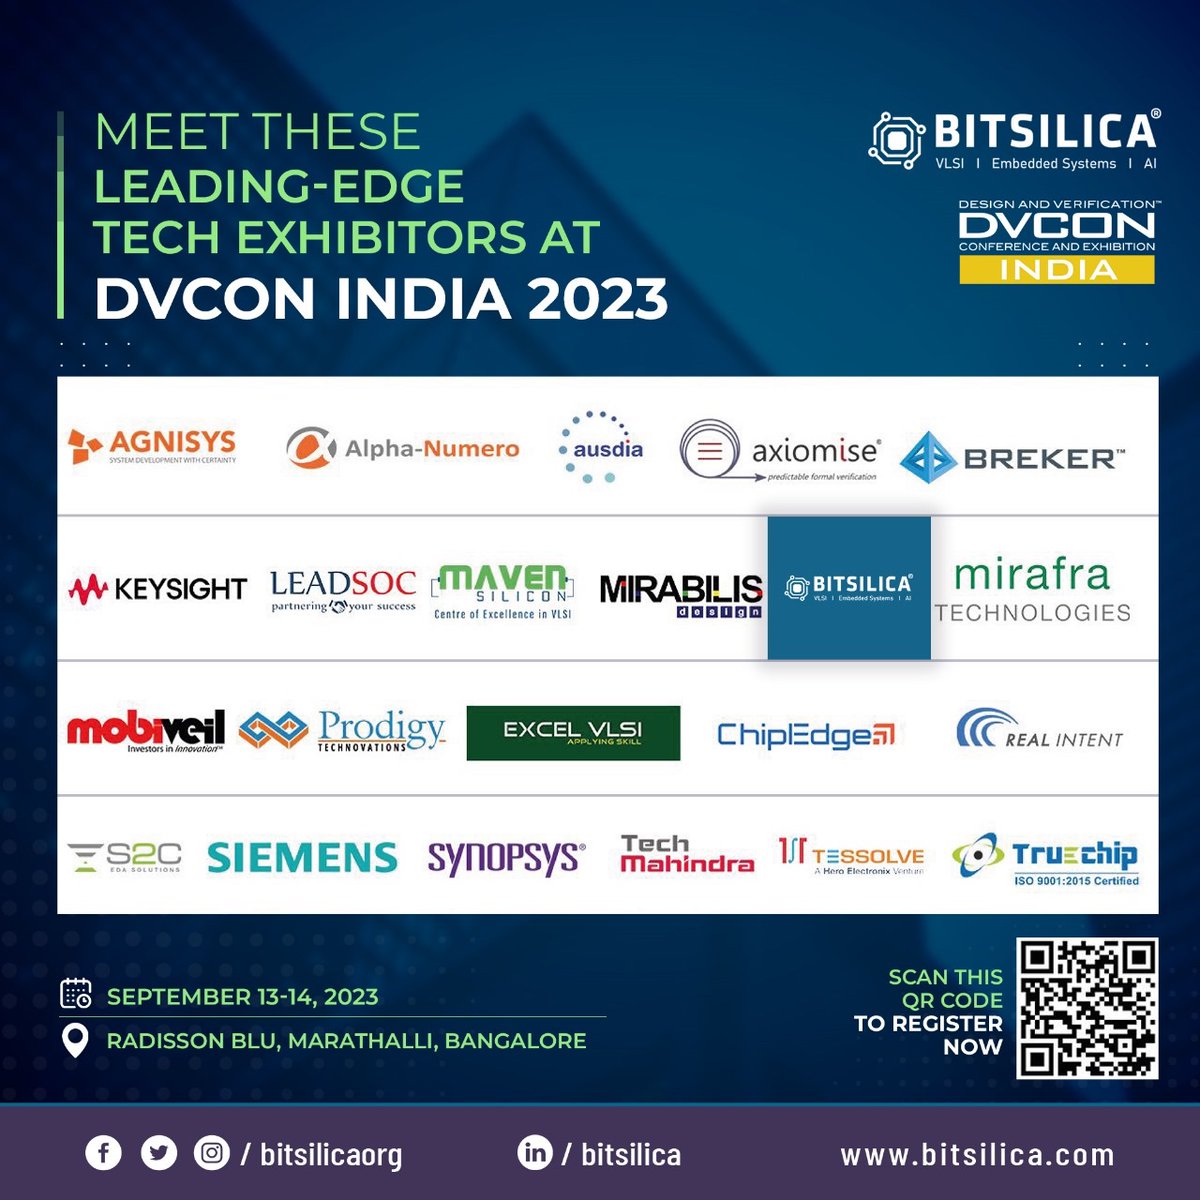 The future of technology is here at DV Con 2023! Get ready for 2 days of brain stimulating exchange of ideas, insights and innovation!

#BITSILICA, #VLSI, #Semiconductors, #Embedded, #AI #VLSIJobs #Technology #CareerGrowth #dvcon2023 #dvcon #design #conference